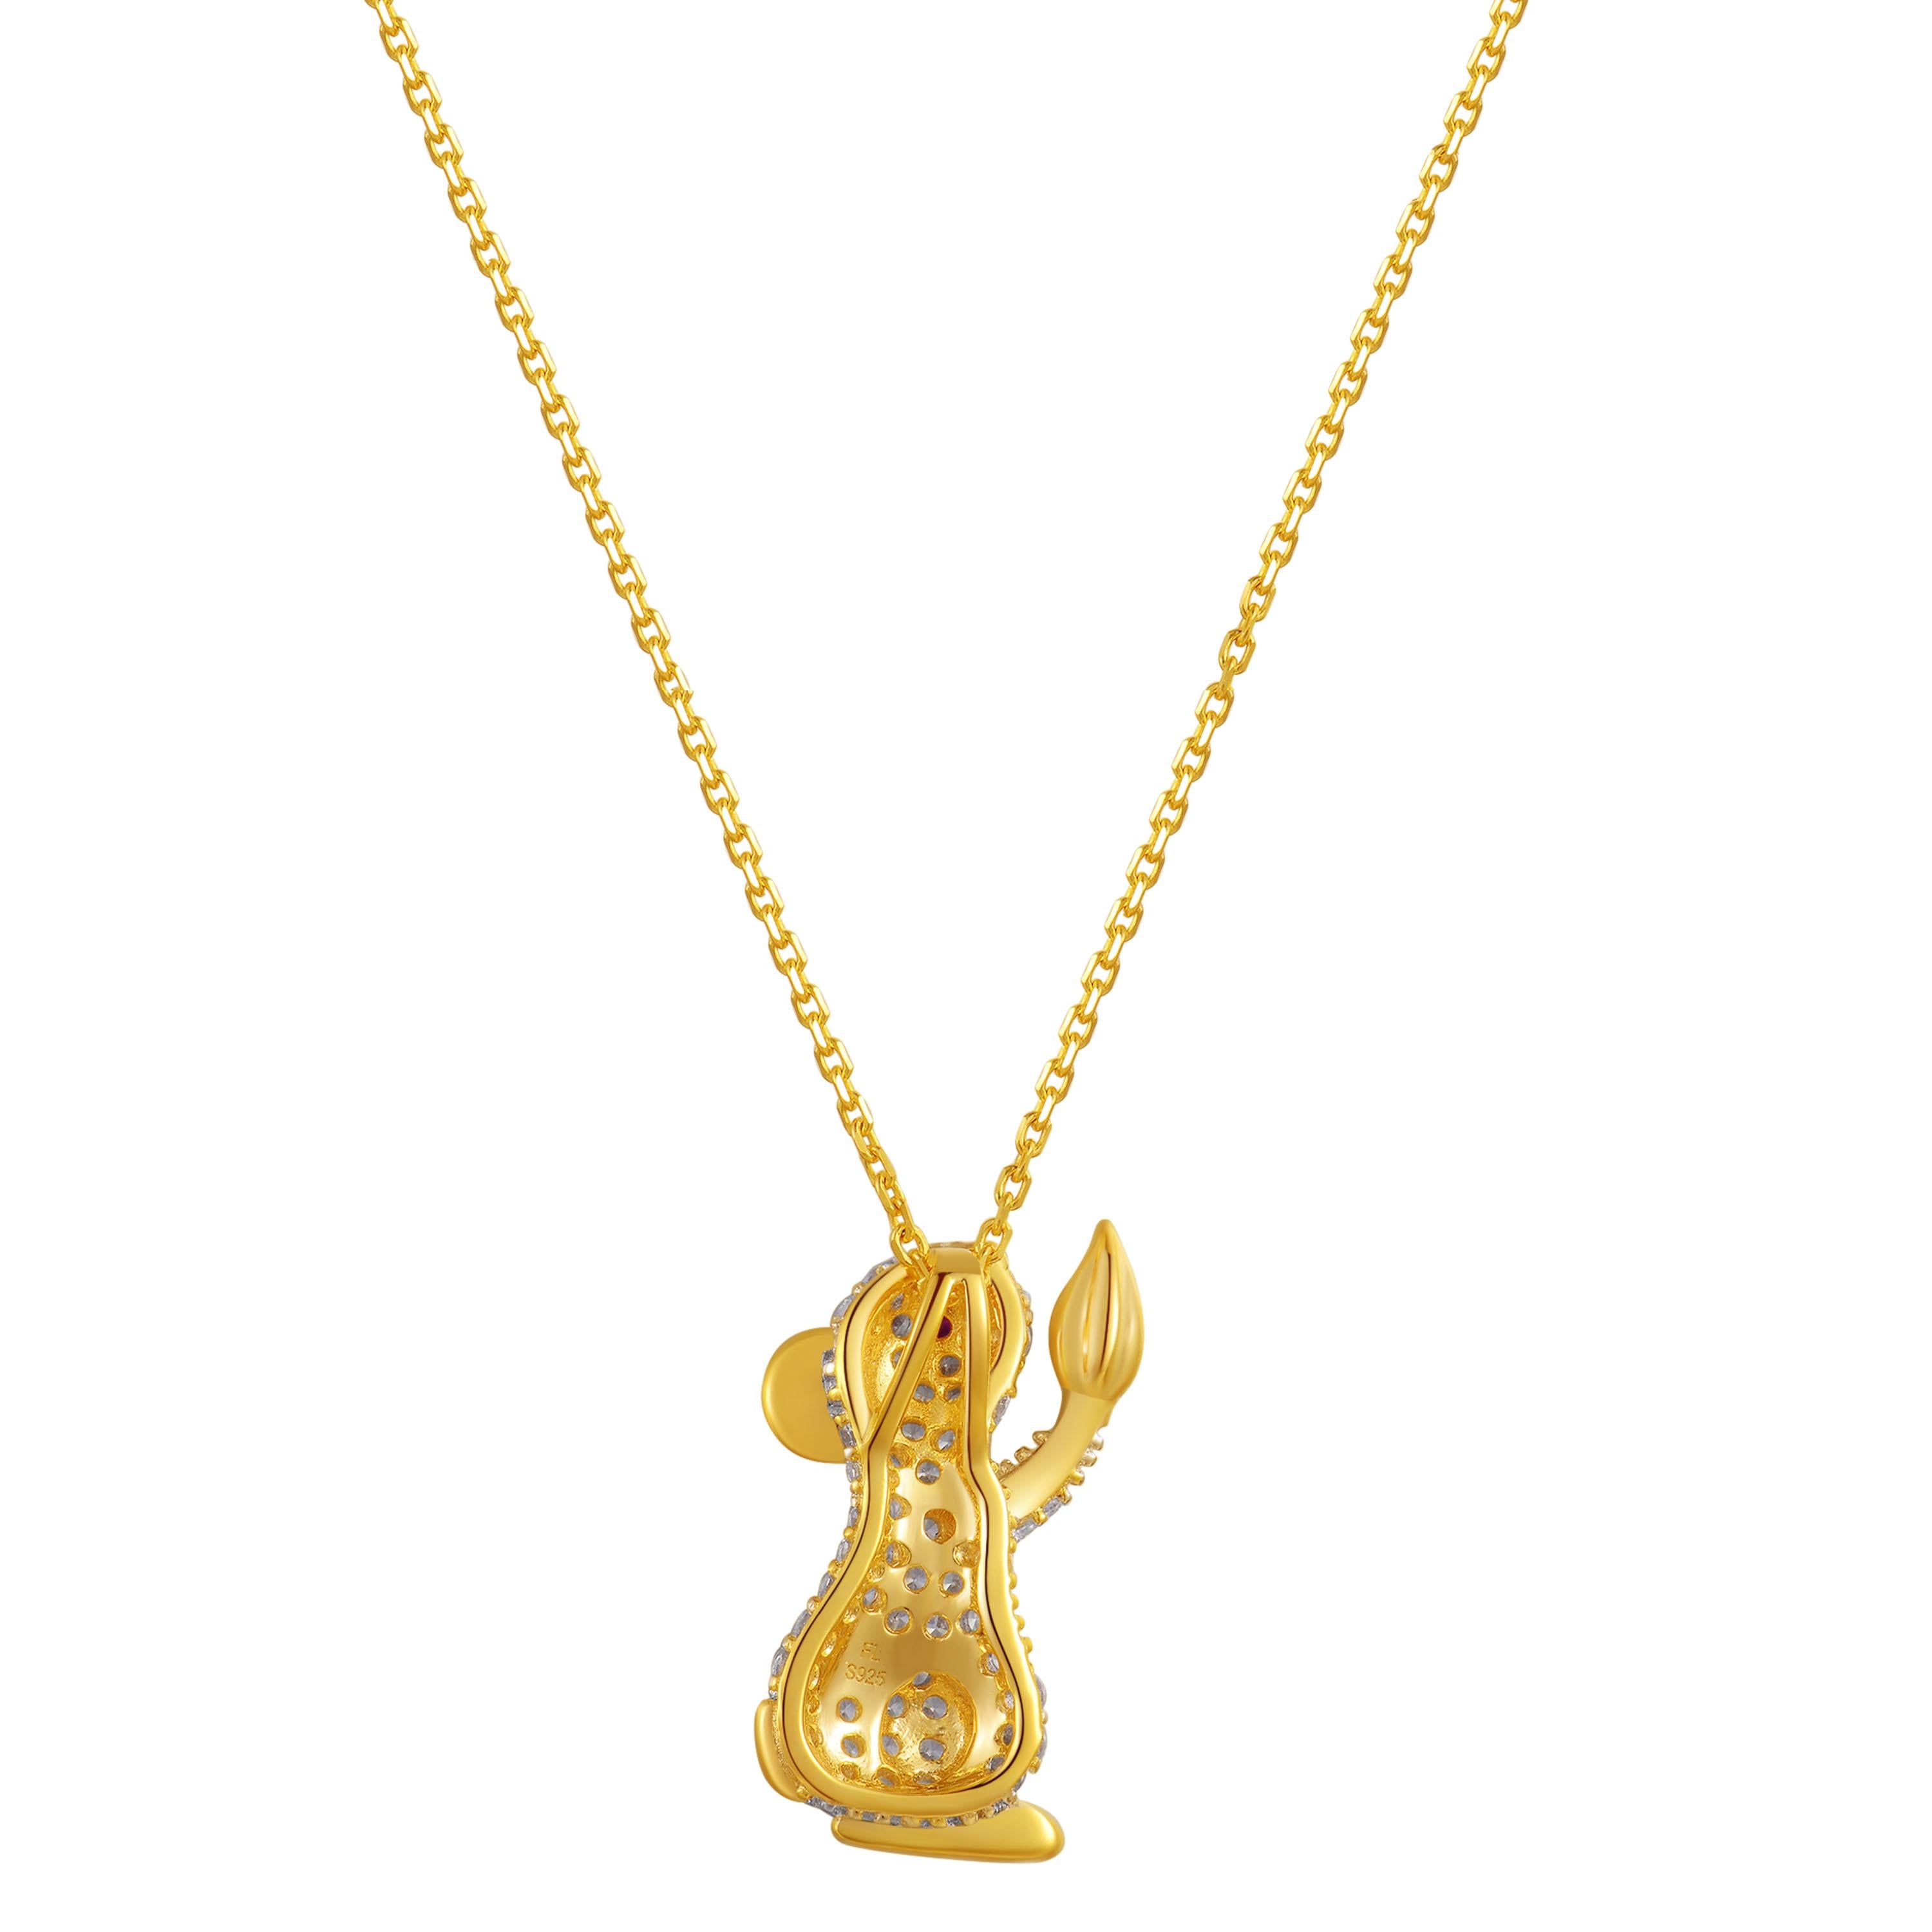 Description:
Rat pendant encrusted with white cubic zirconia and red cubic zirconia eye, set in yellow gold plate on sterling silver. Chain length is 16 inches + 2-inch extension.

*All our cubic zirconia are 8 hearts and 8 arrows cut. This means